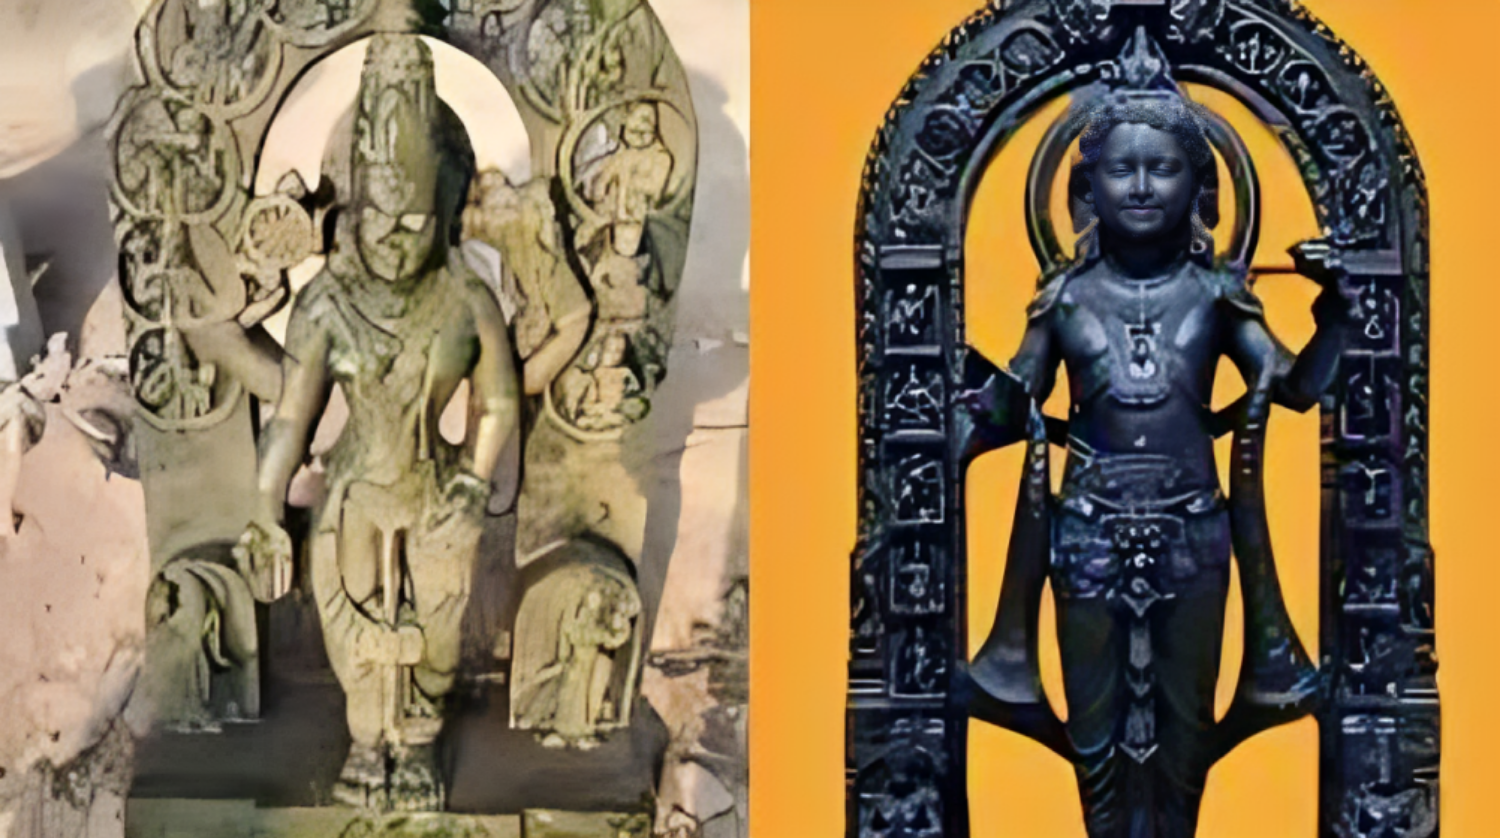 Picture of Amazing! Ancient idol of Lord Vishnu found in river, exactly like 'Ram Lalla' of Ayodhya, 1000 years old